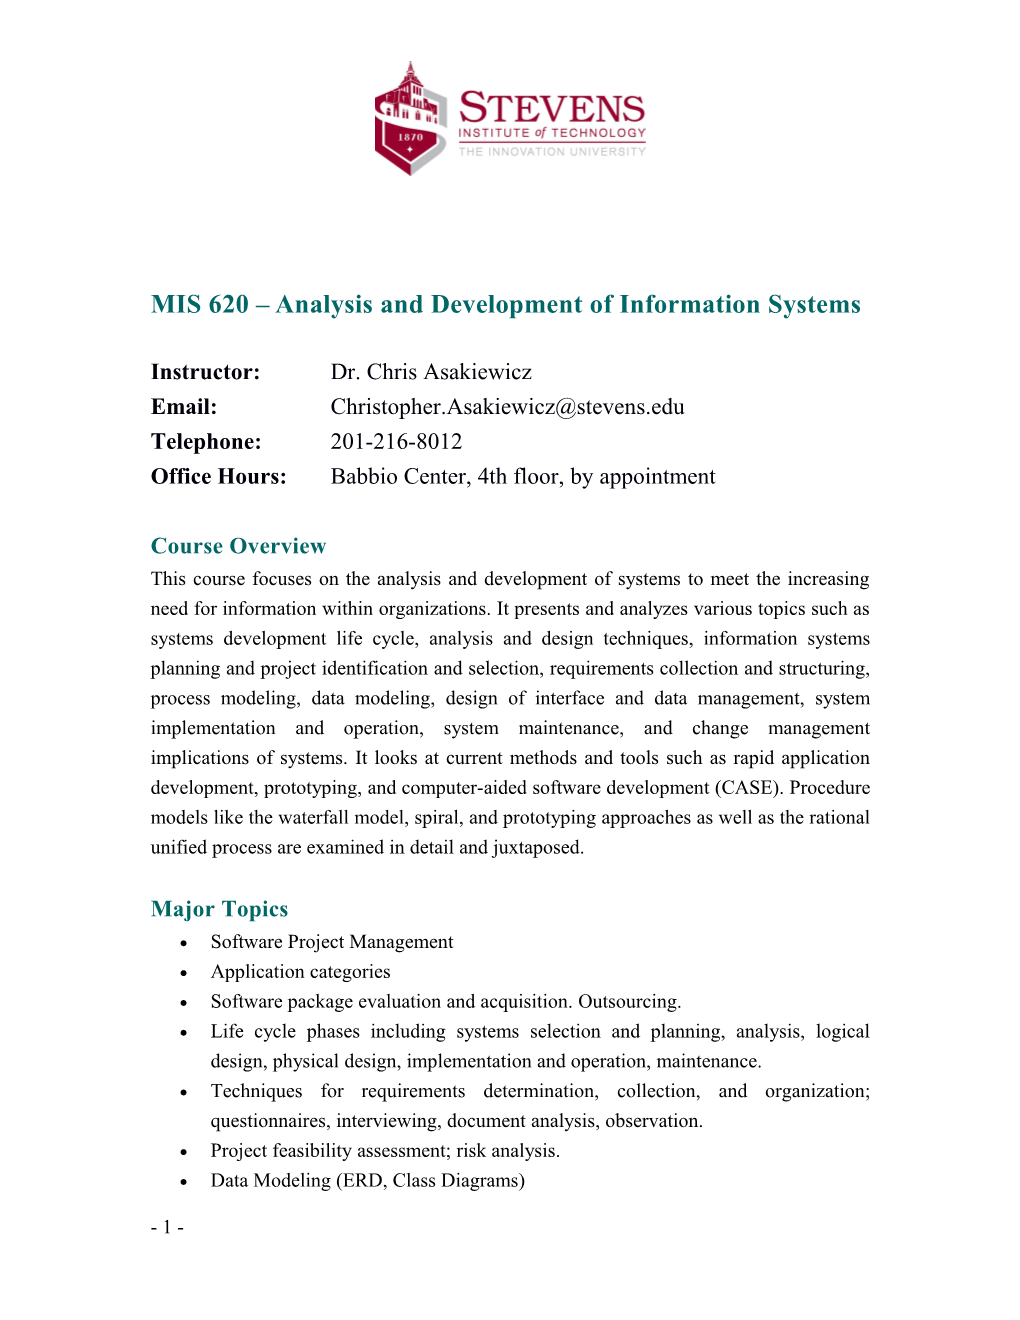 MIS 620 - Analysis and Development of Information Systems